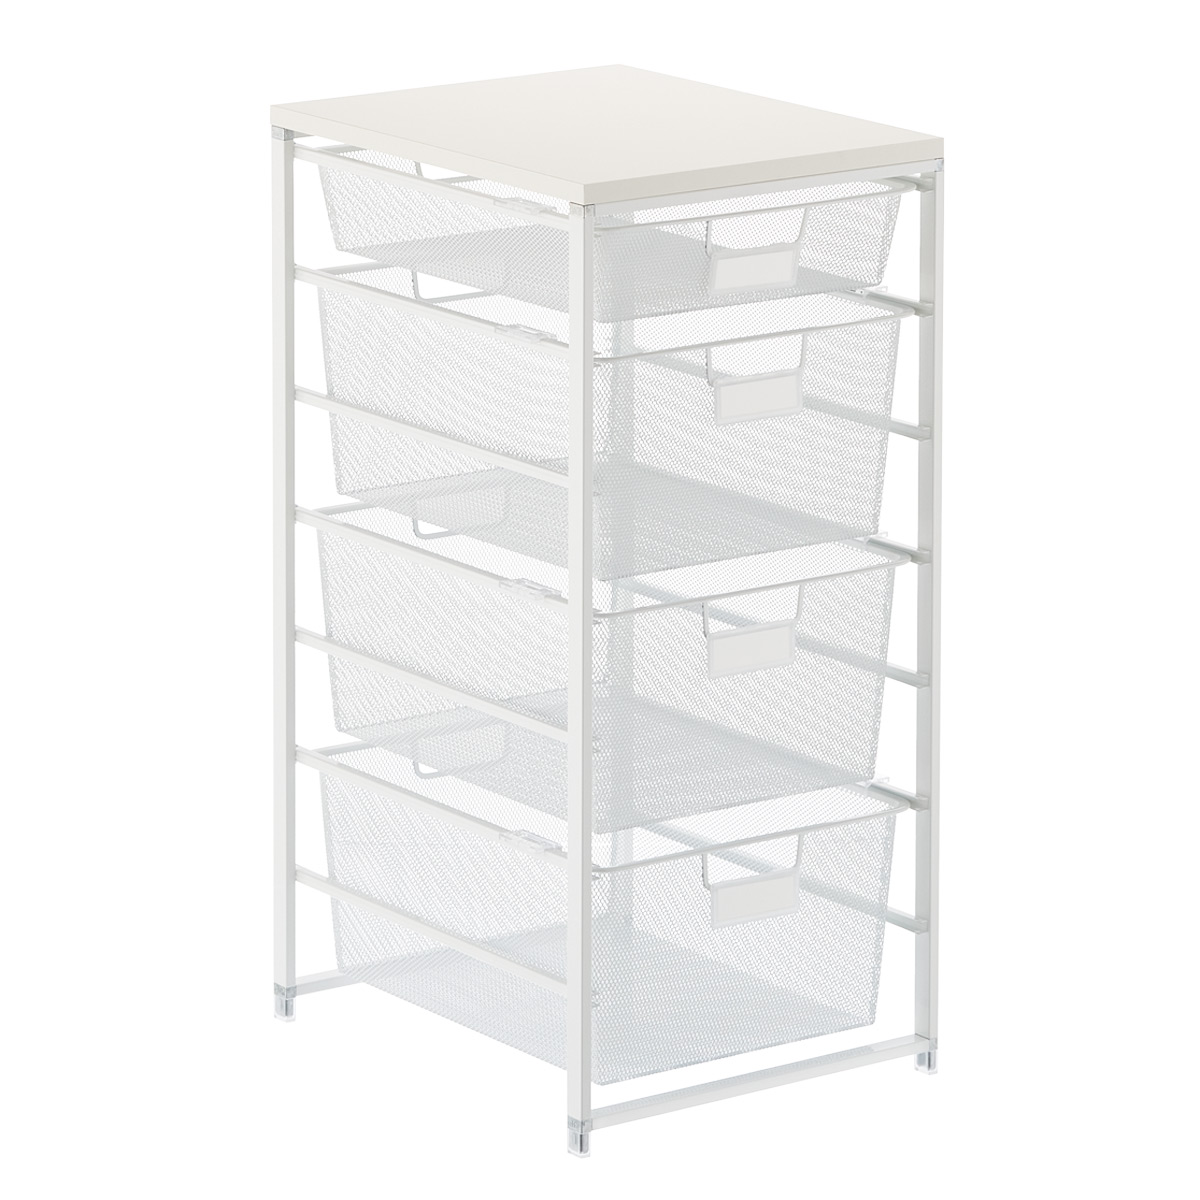 https://www.containerstore.com/catalogimages/419820/10067226_Narrow_Cabinet-Sized_Mesh_C.jpg